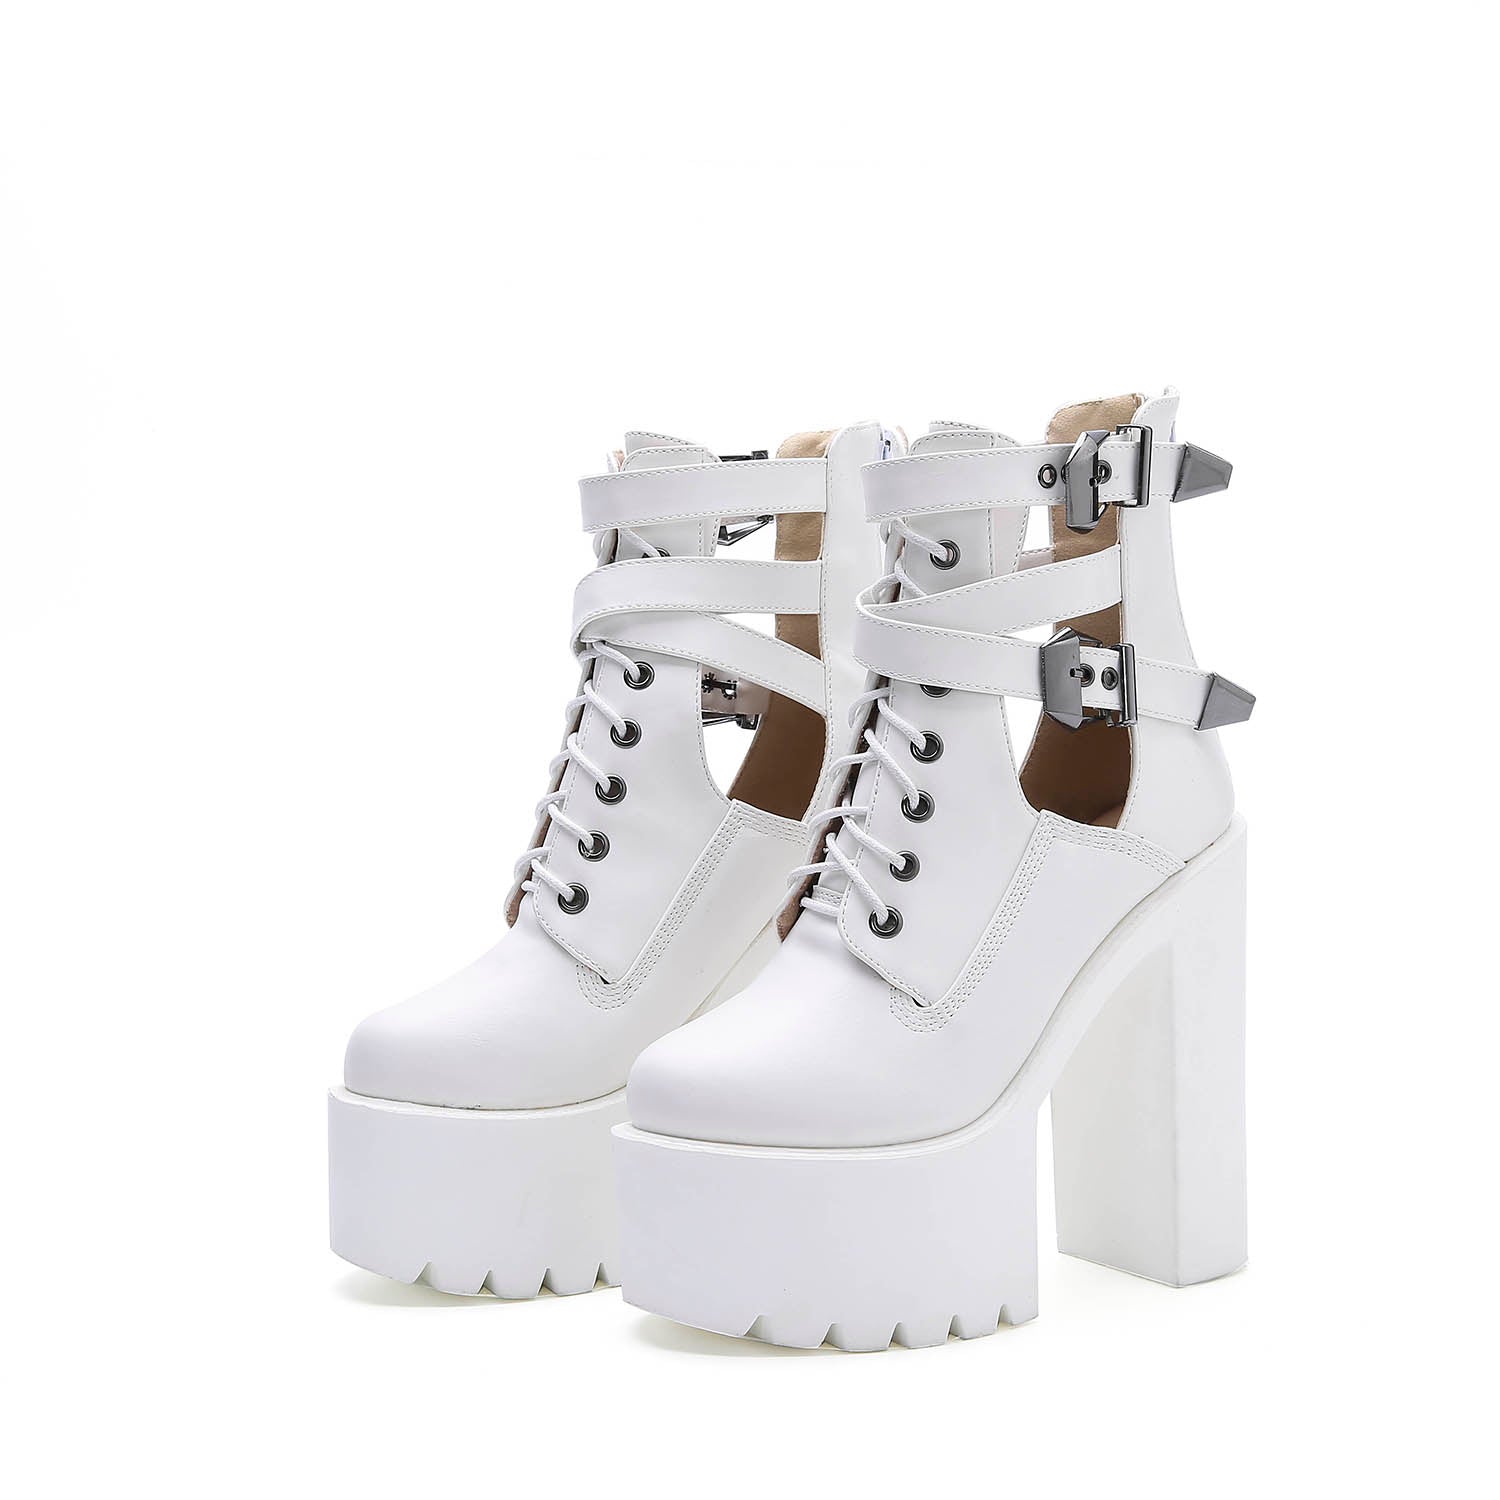 Genuine Leather High Heels Rock Style Boots / Alternative Thick Platform Boots - HARD'N'HEAVY